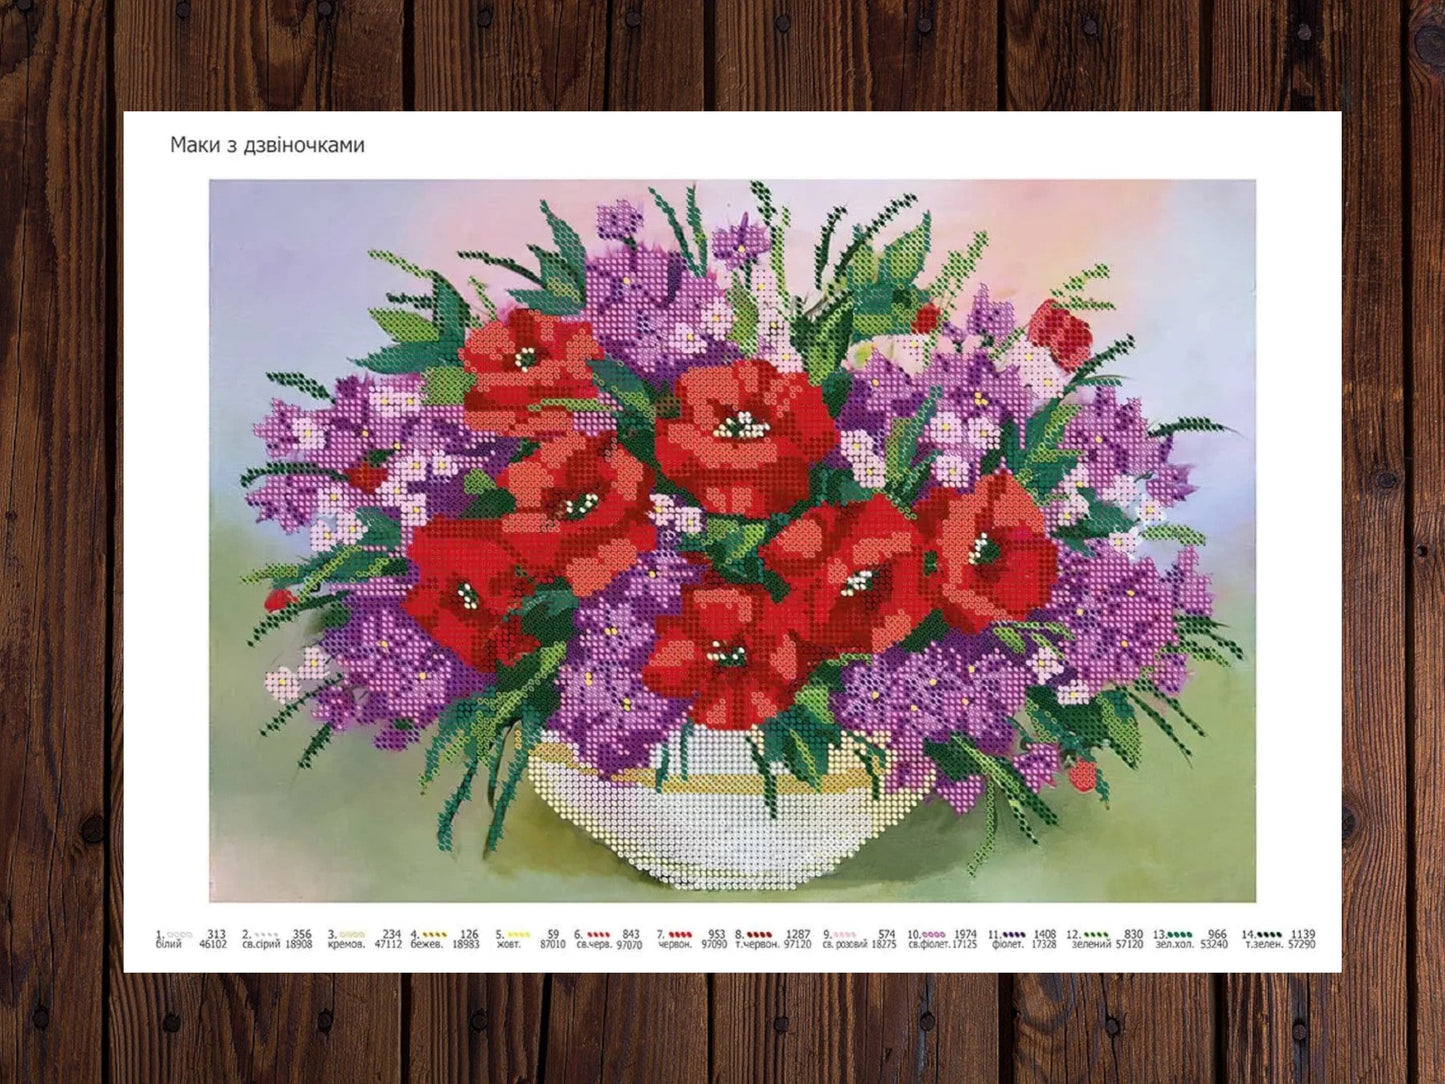 Vibrant Poppy Blooms: DIY Bead Embroidery Kit for Stunning Home Decor Size: 13.8-9.5in (36-25cm) - VadymShop